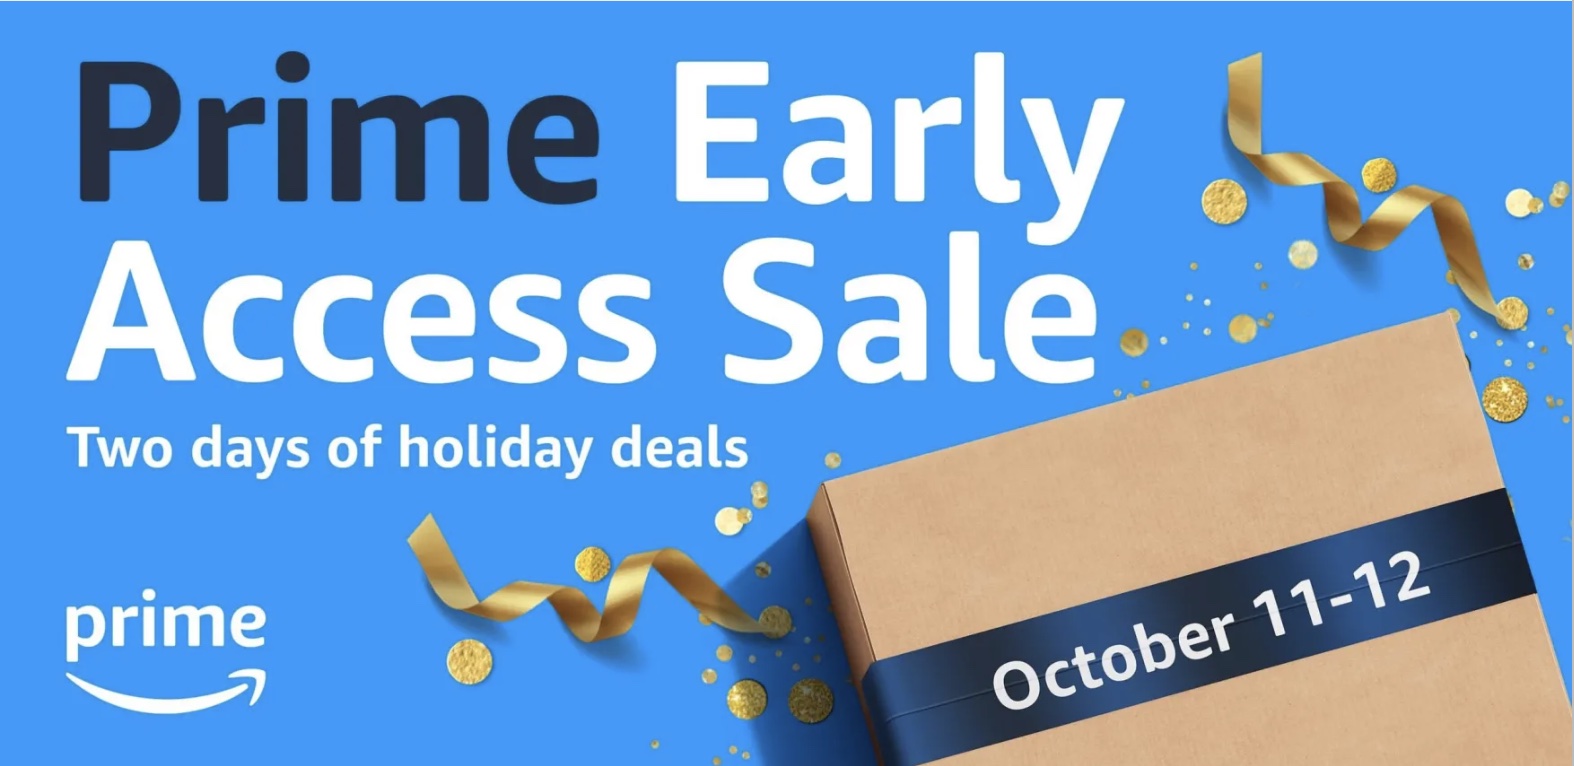 Amazon Prime banner that reads "Prime Early Access Sale. Two days of holiday deals"